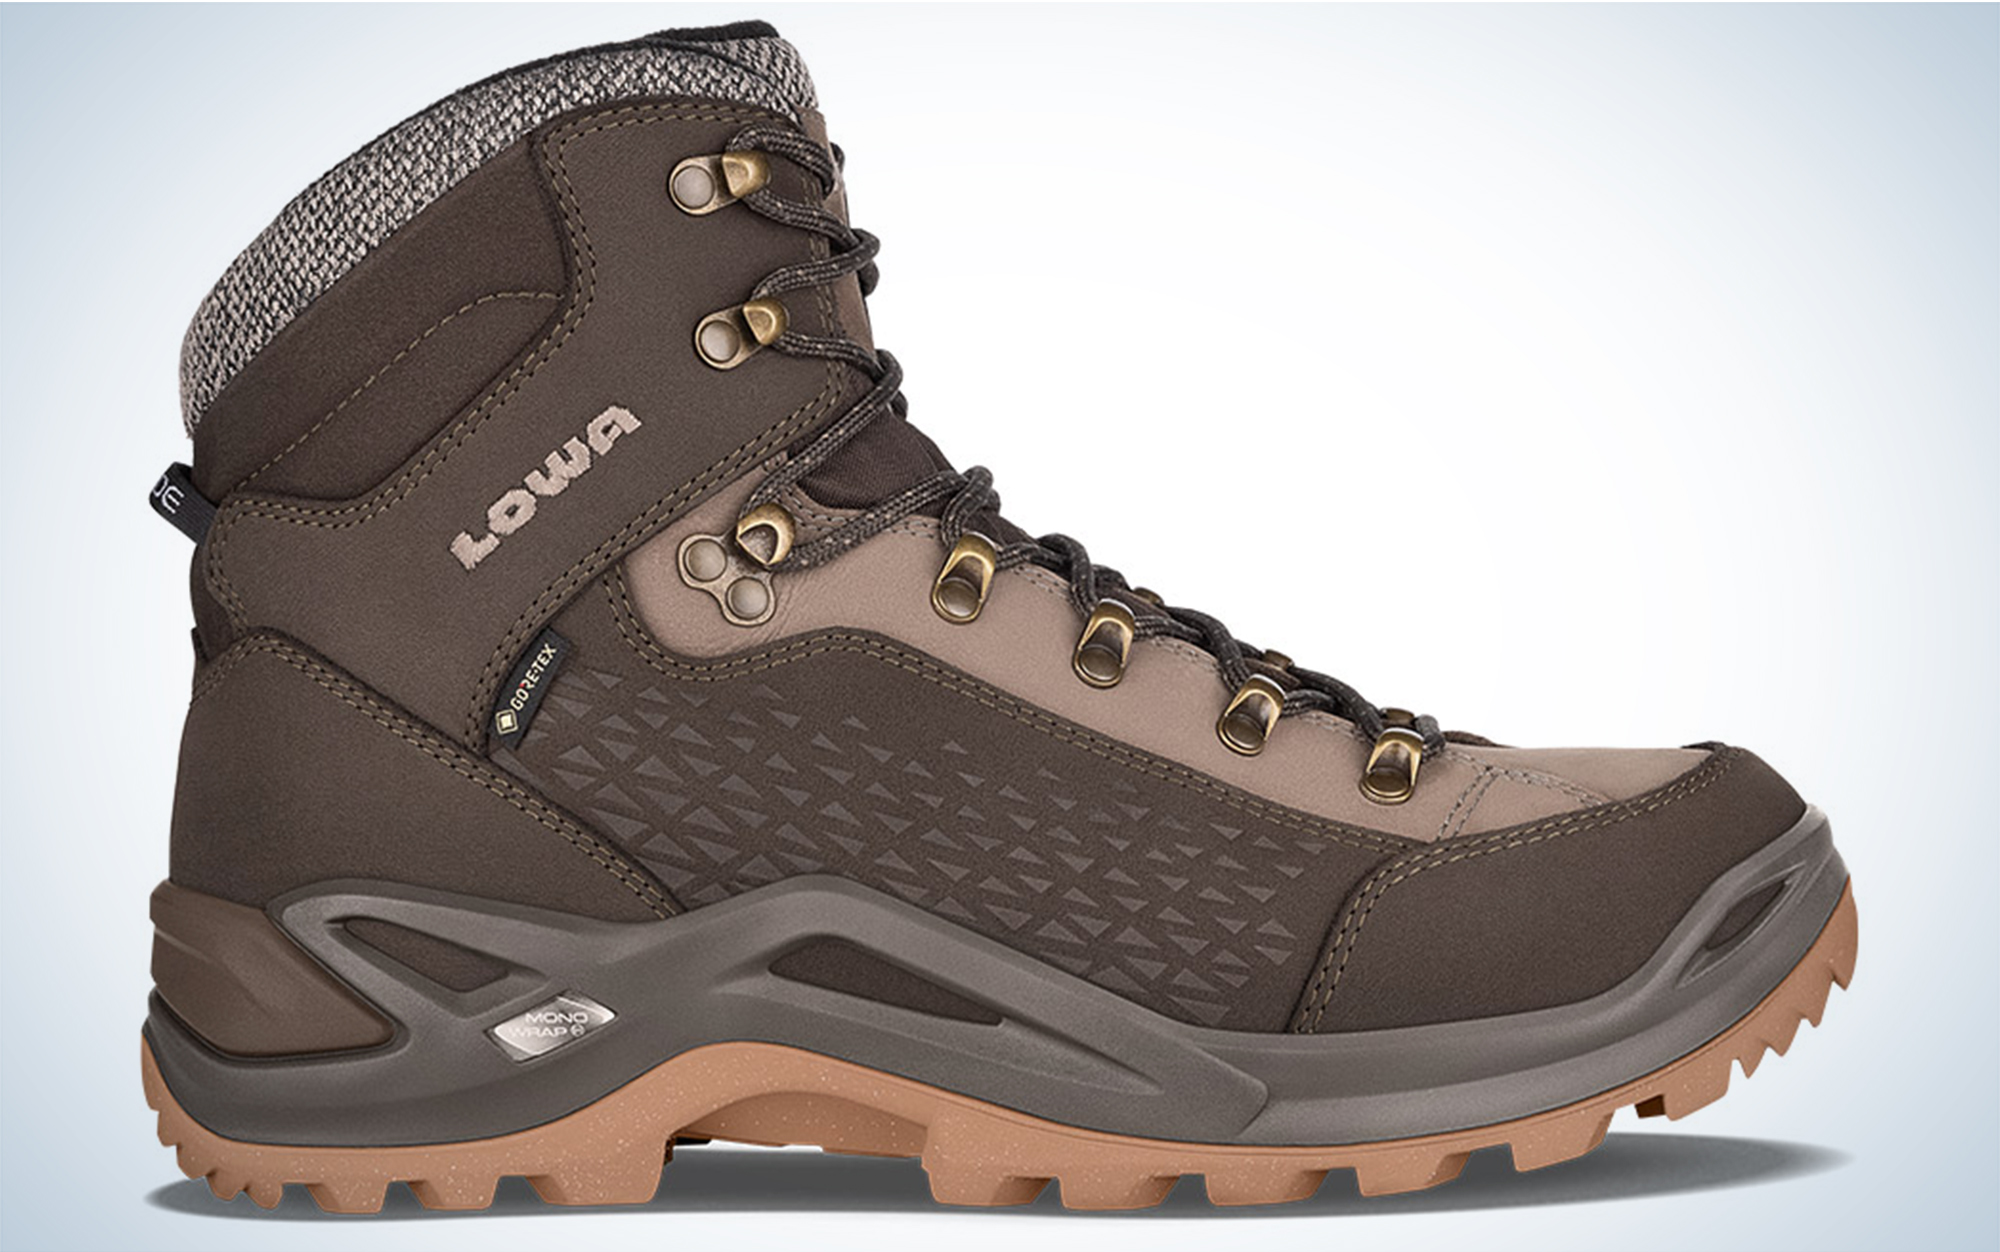 The Lowa Renegade Warm GTX MidÂ is the best hiking boot for men in winter.